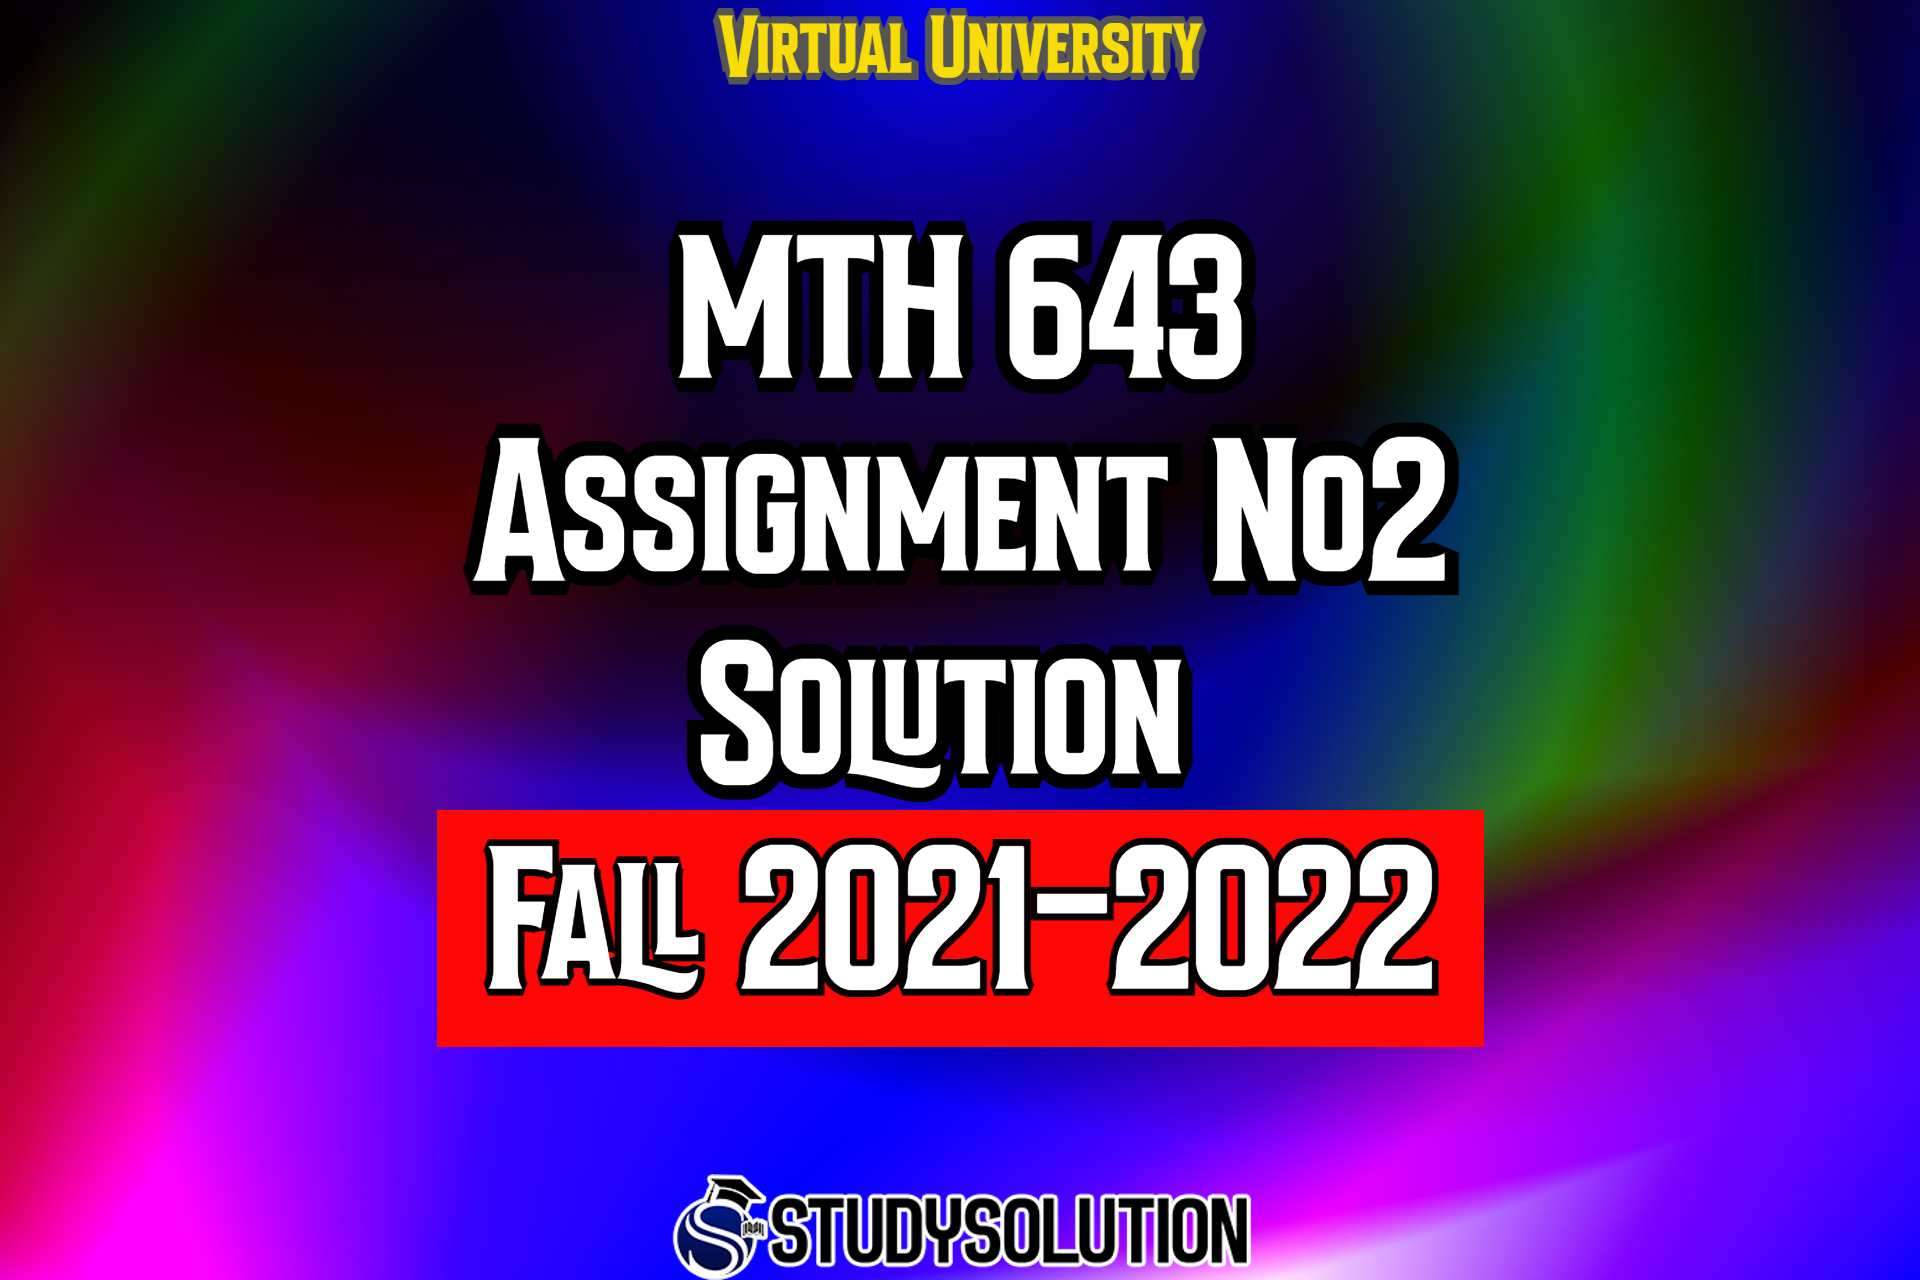 MTH643 Assignment No 2 Solution Fall 2022